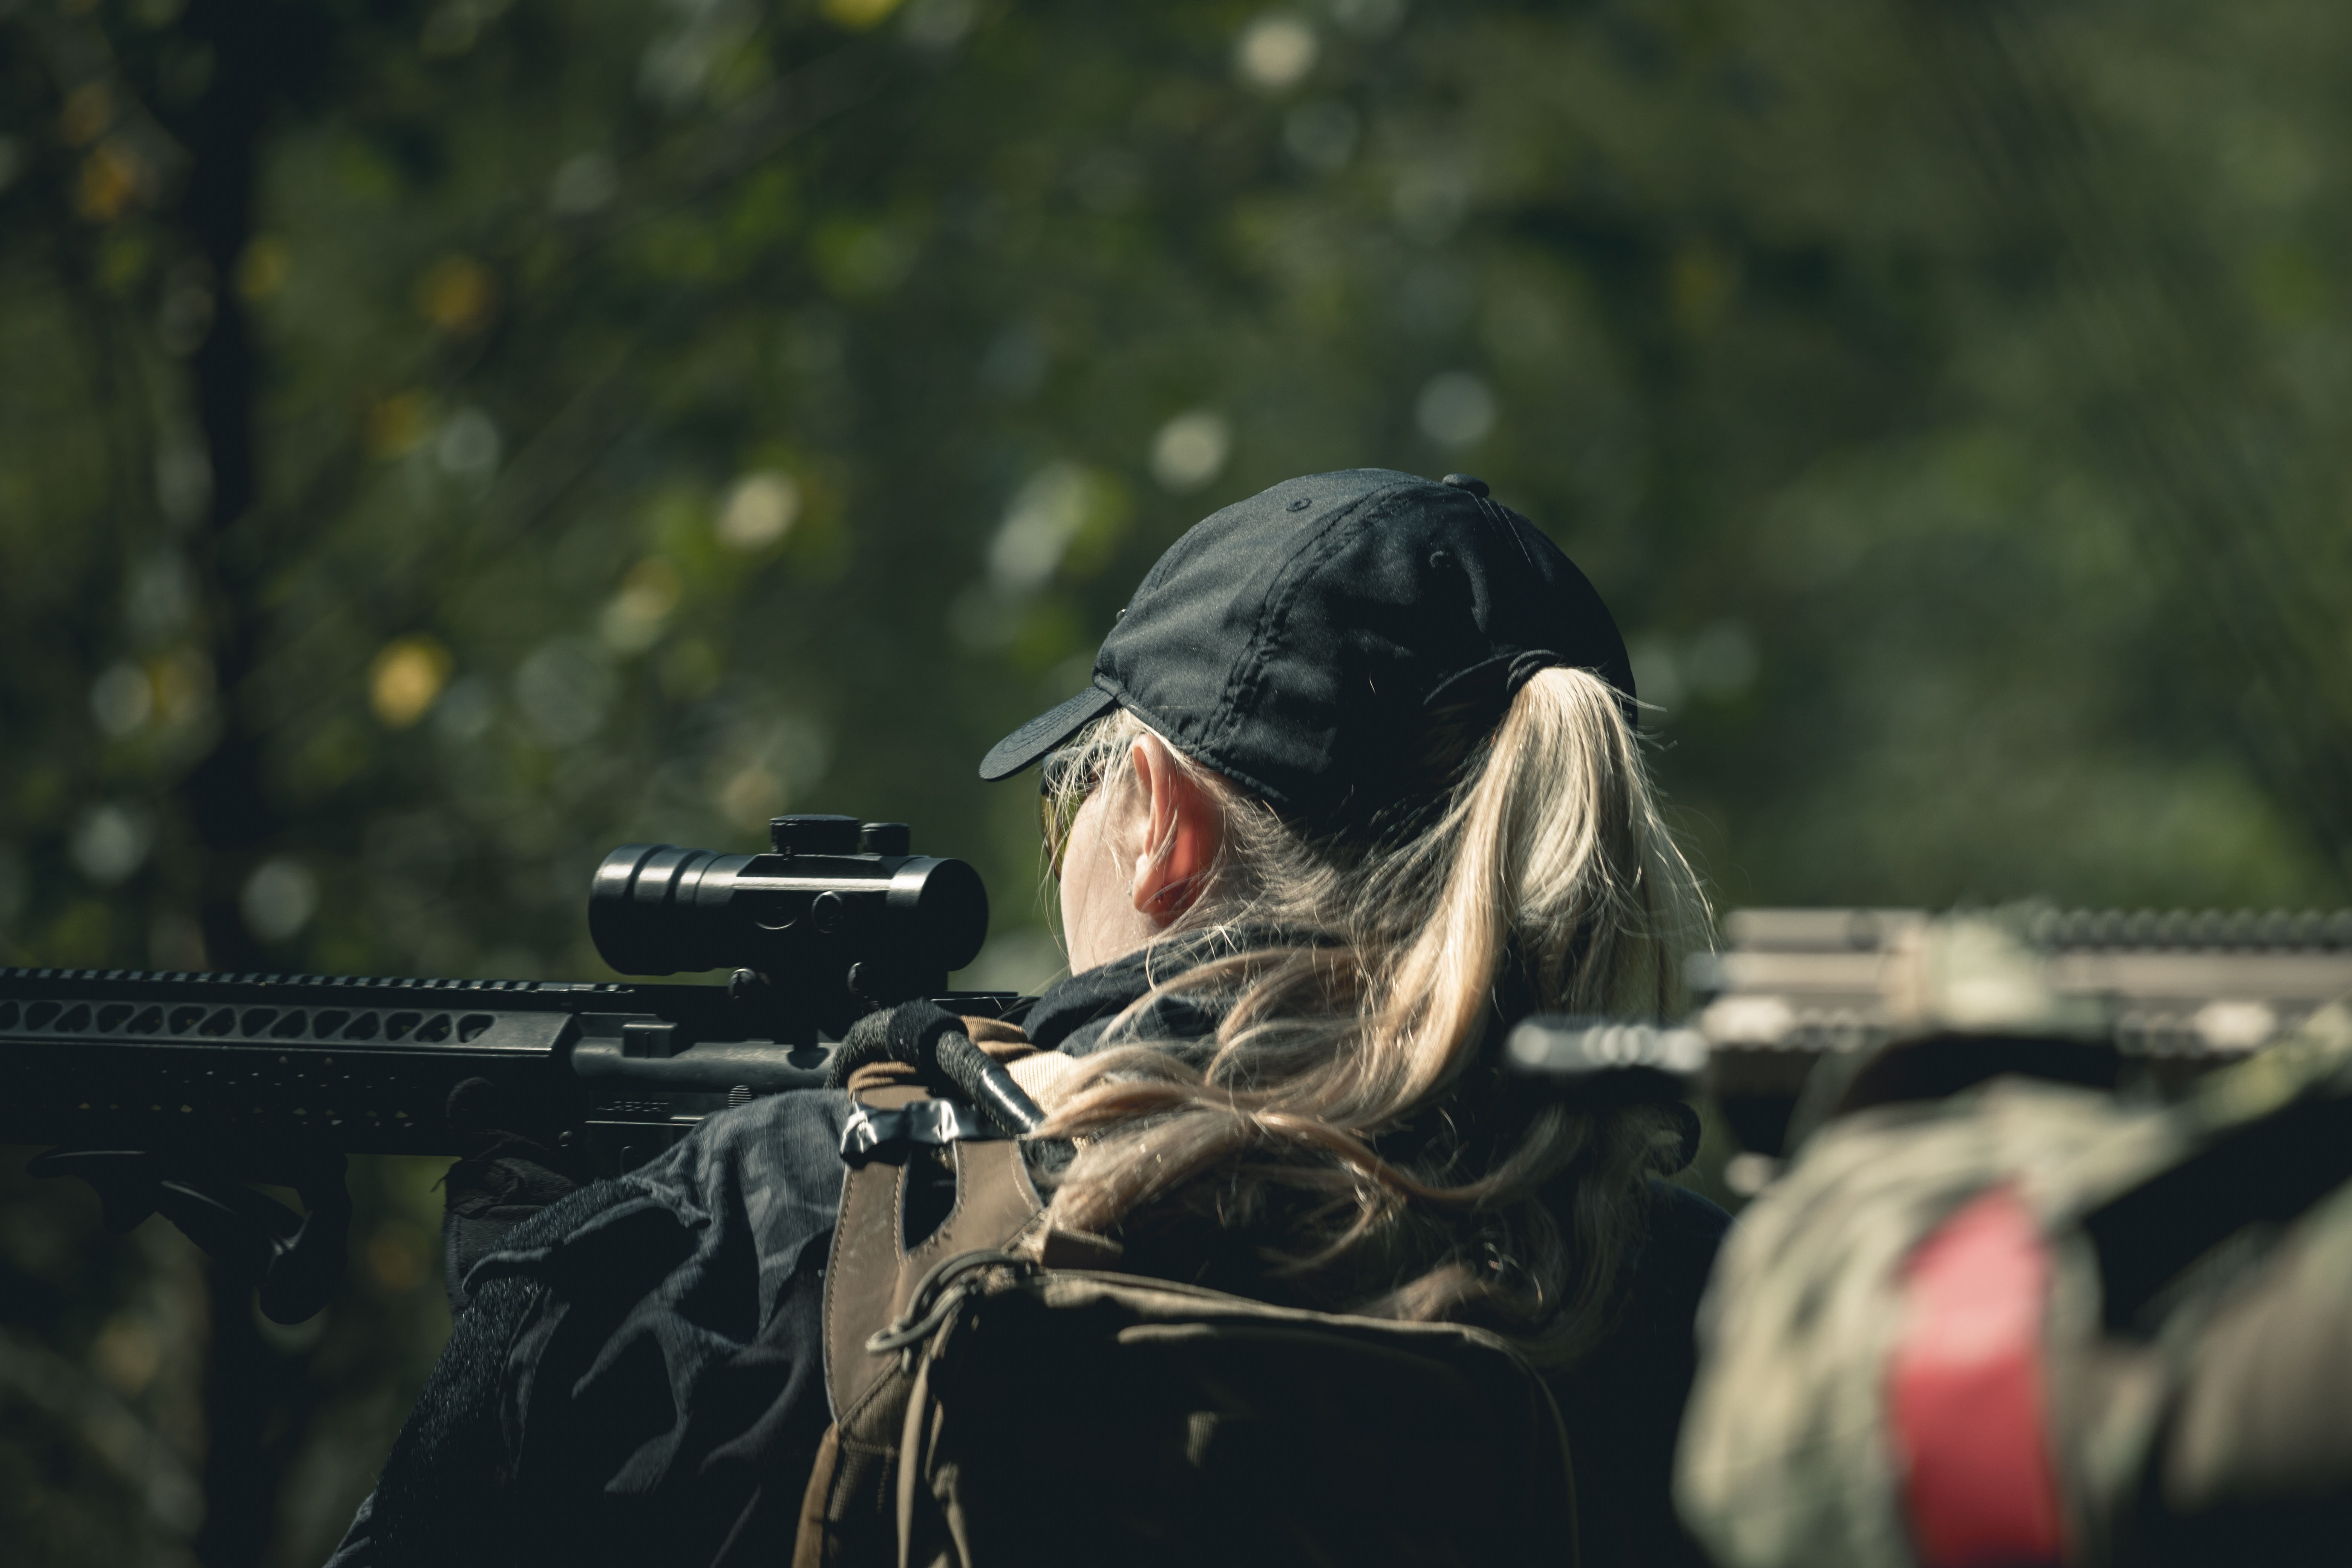 What are the most Important Tactical Equipment for Women